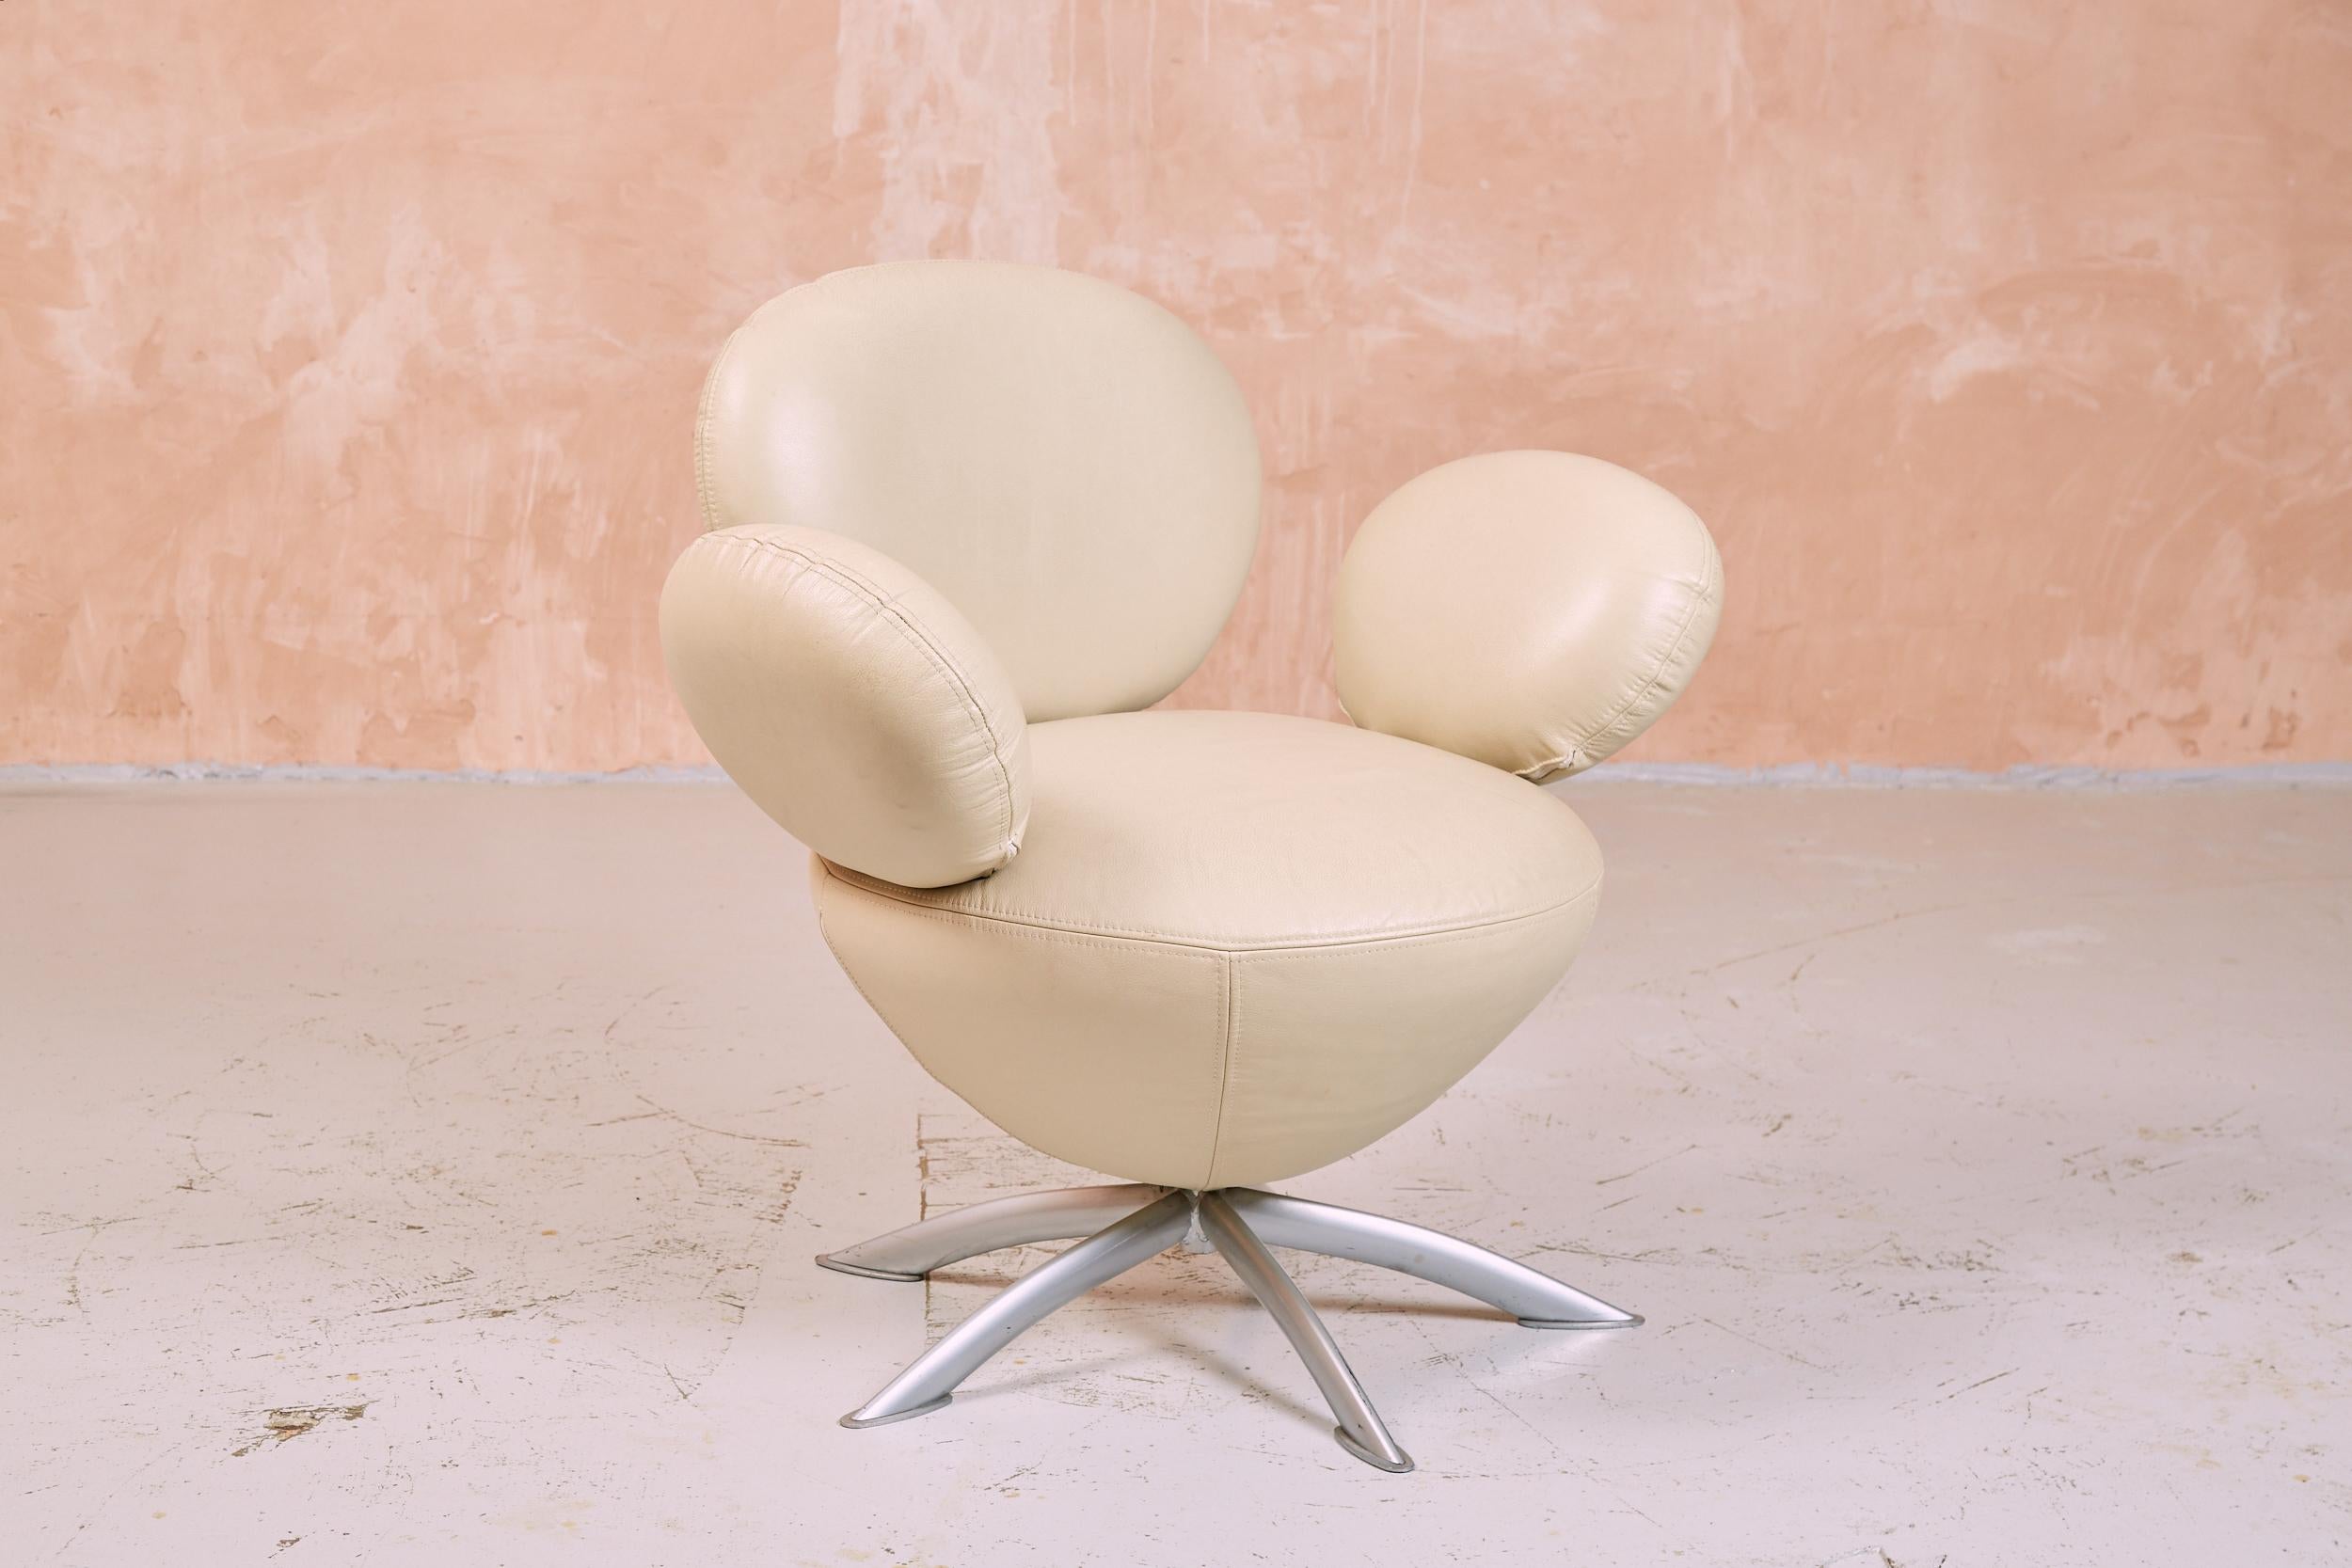 Faux Leather Postmodern Cream Balloon Lounge Swivel Chair, 1990s For Sale